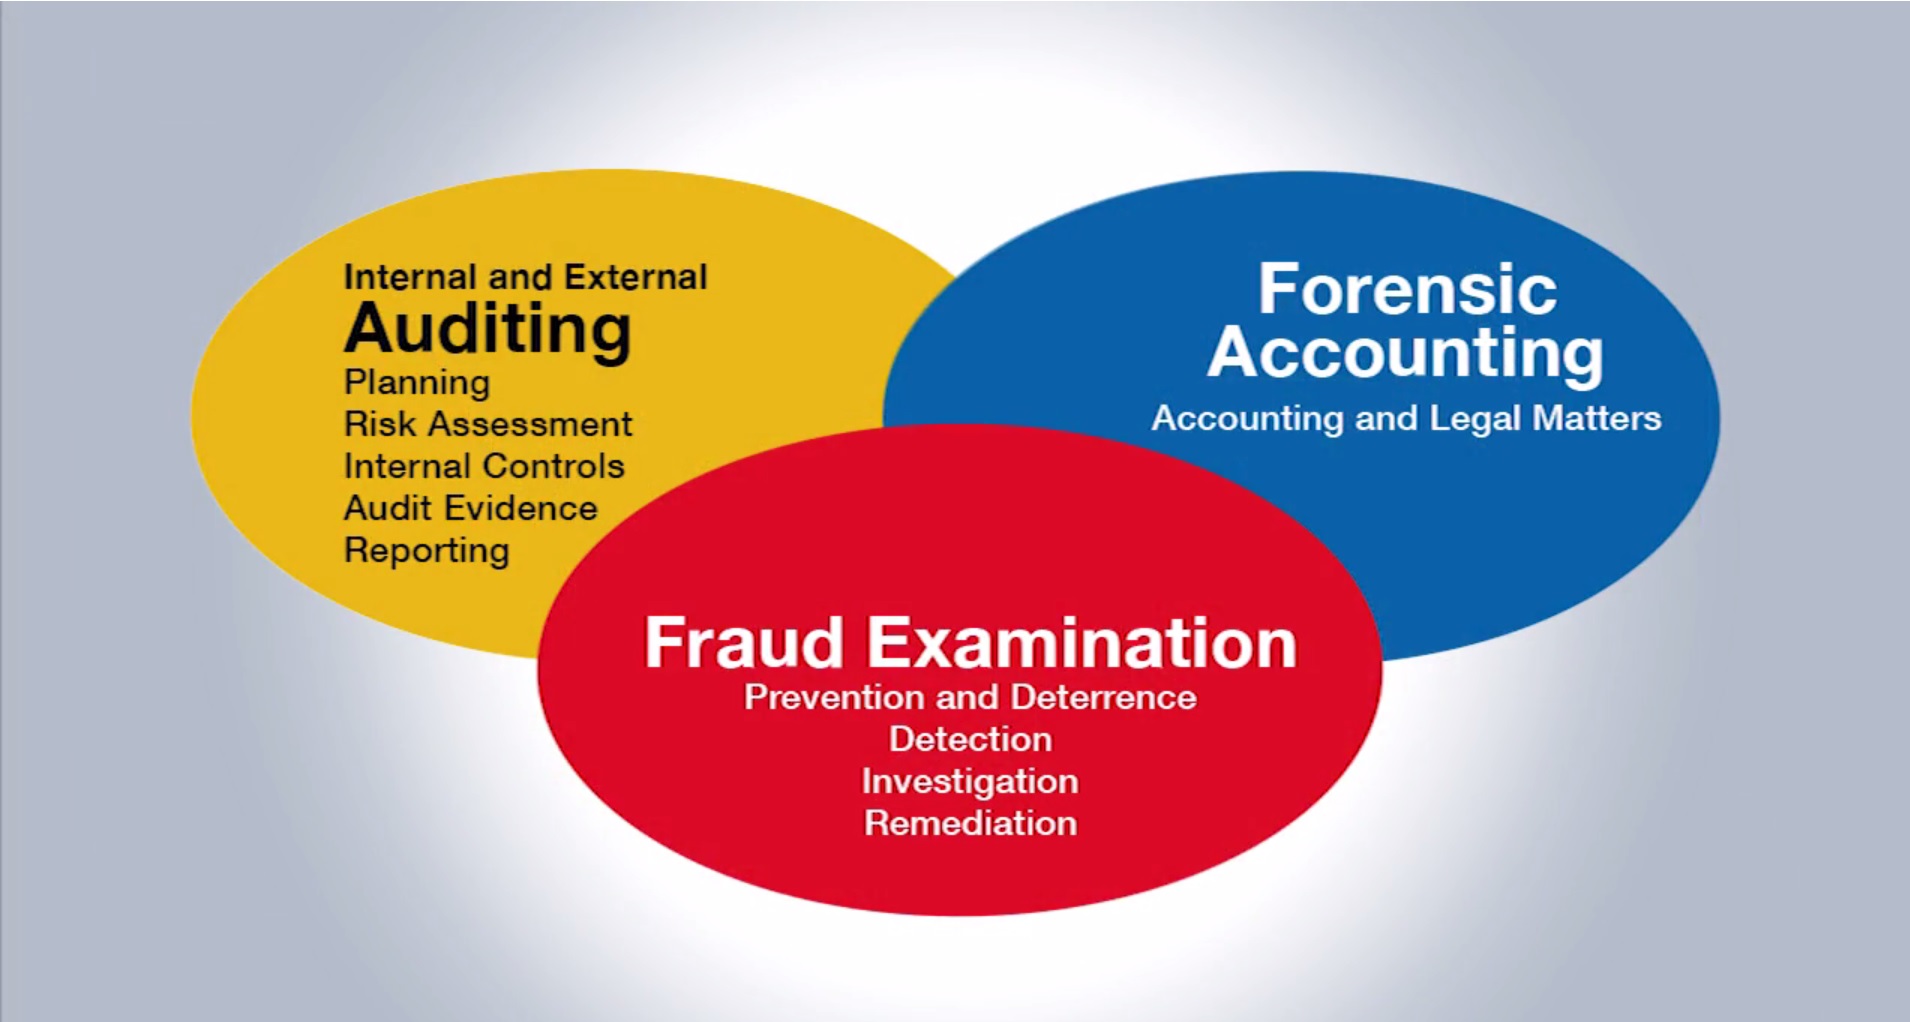 TRAINING COURSE ON FORENSIC ACCOUNTING AND FRAUD CONTROL, Dubai, United Arab Emirates